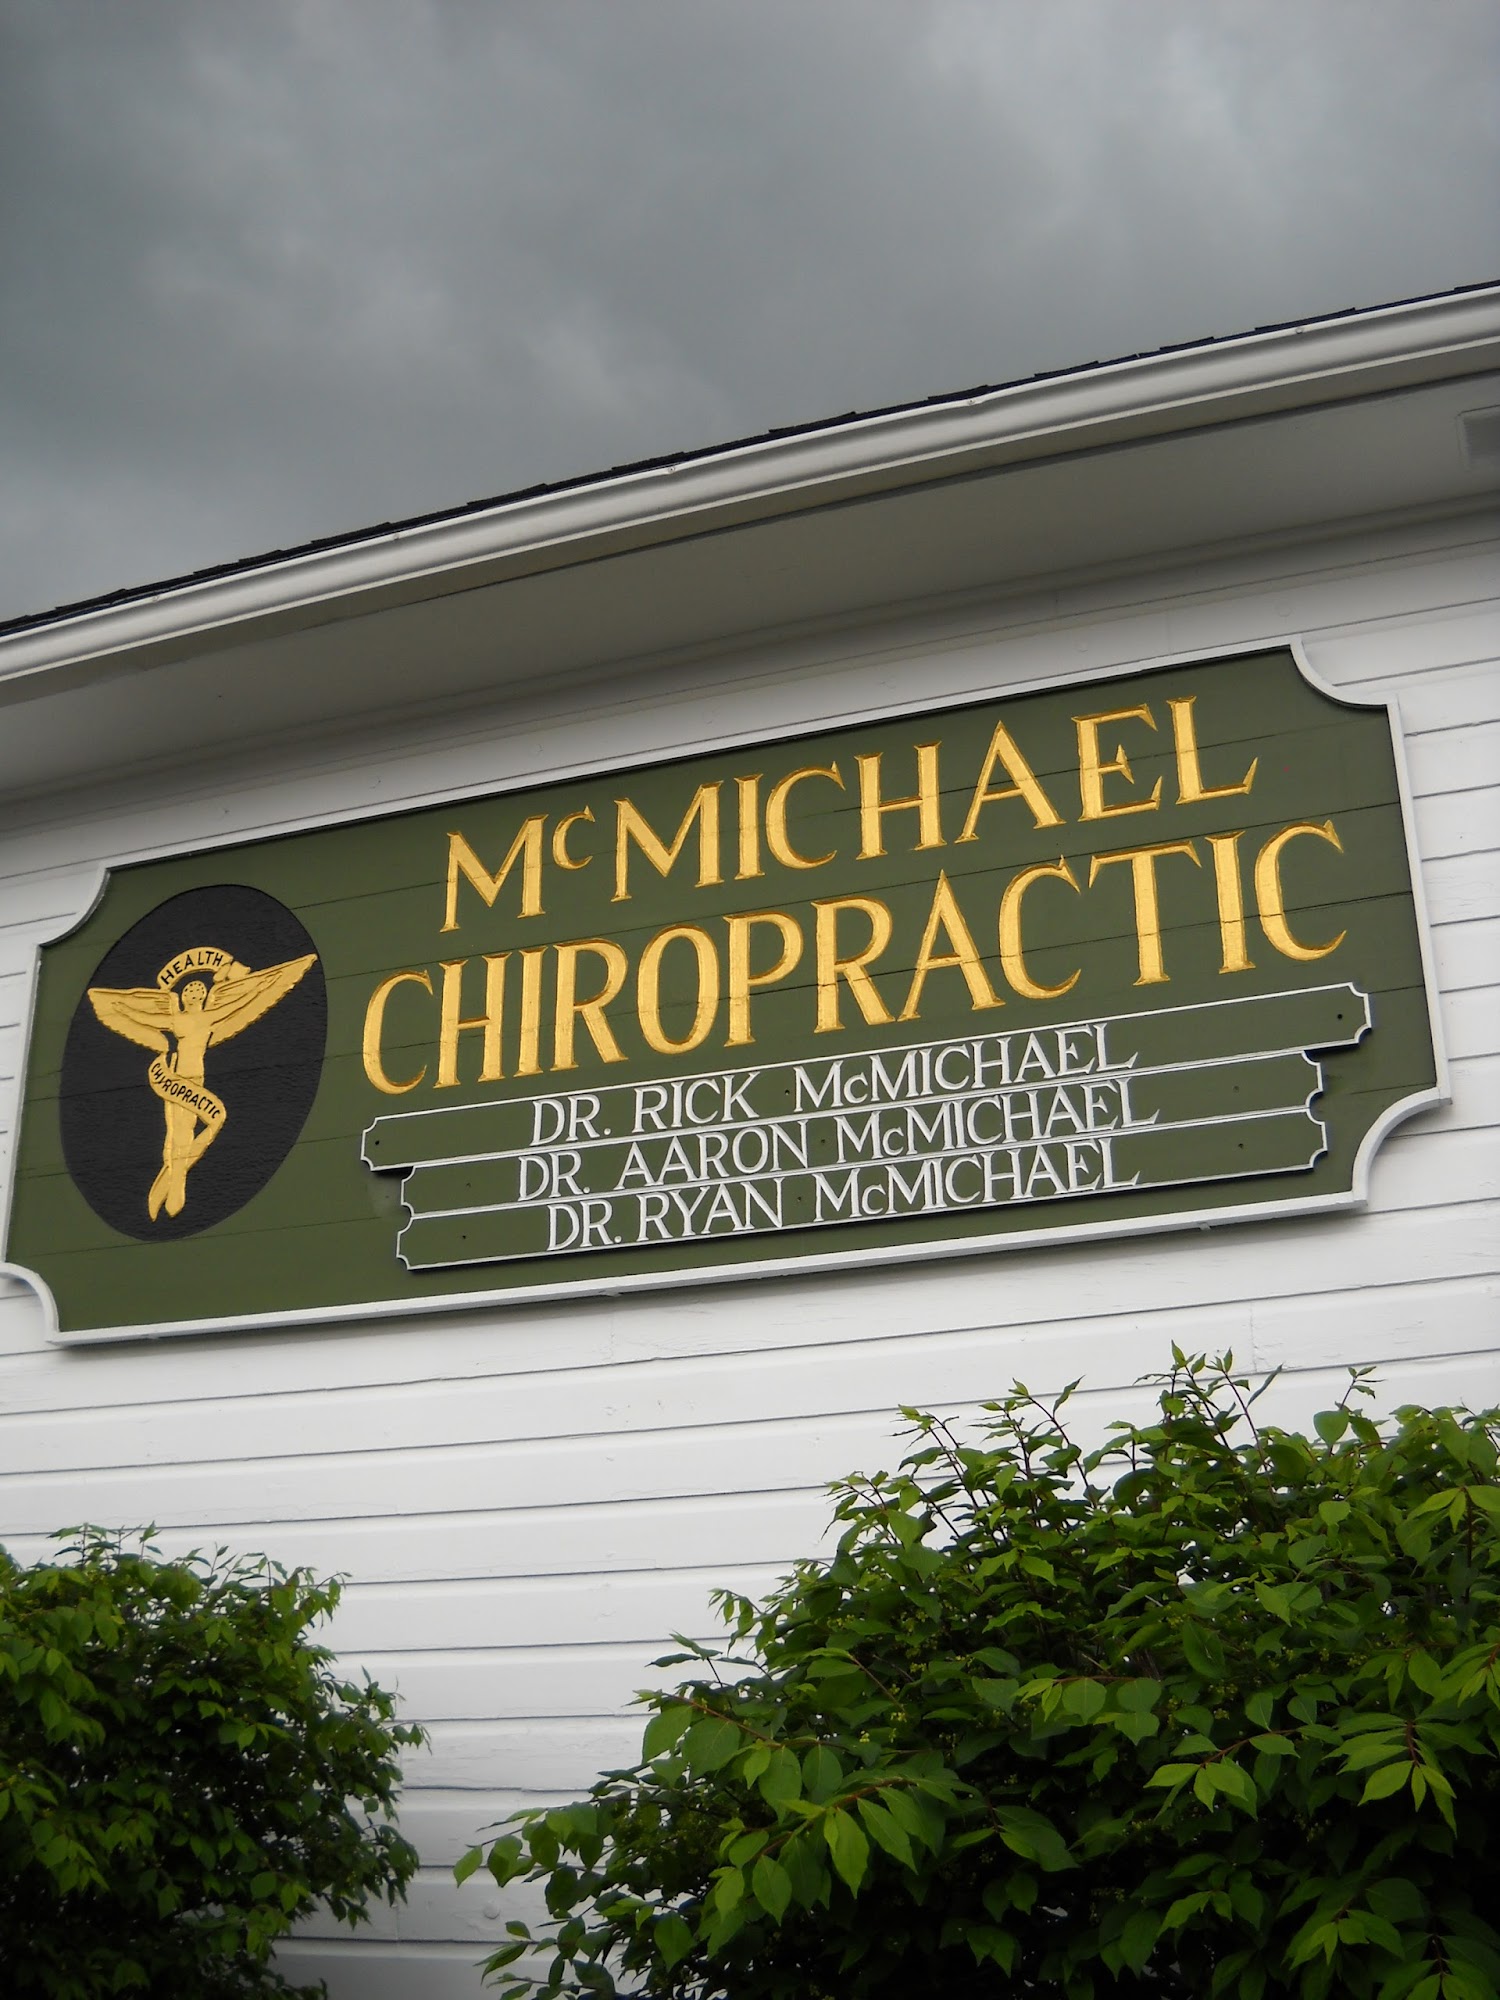 McMichael Chiropractic Clinic